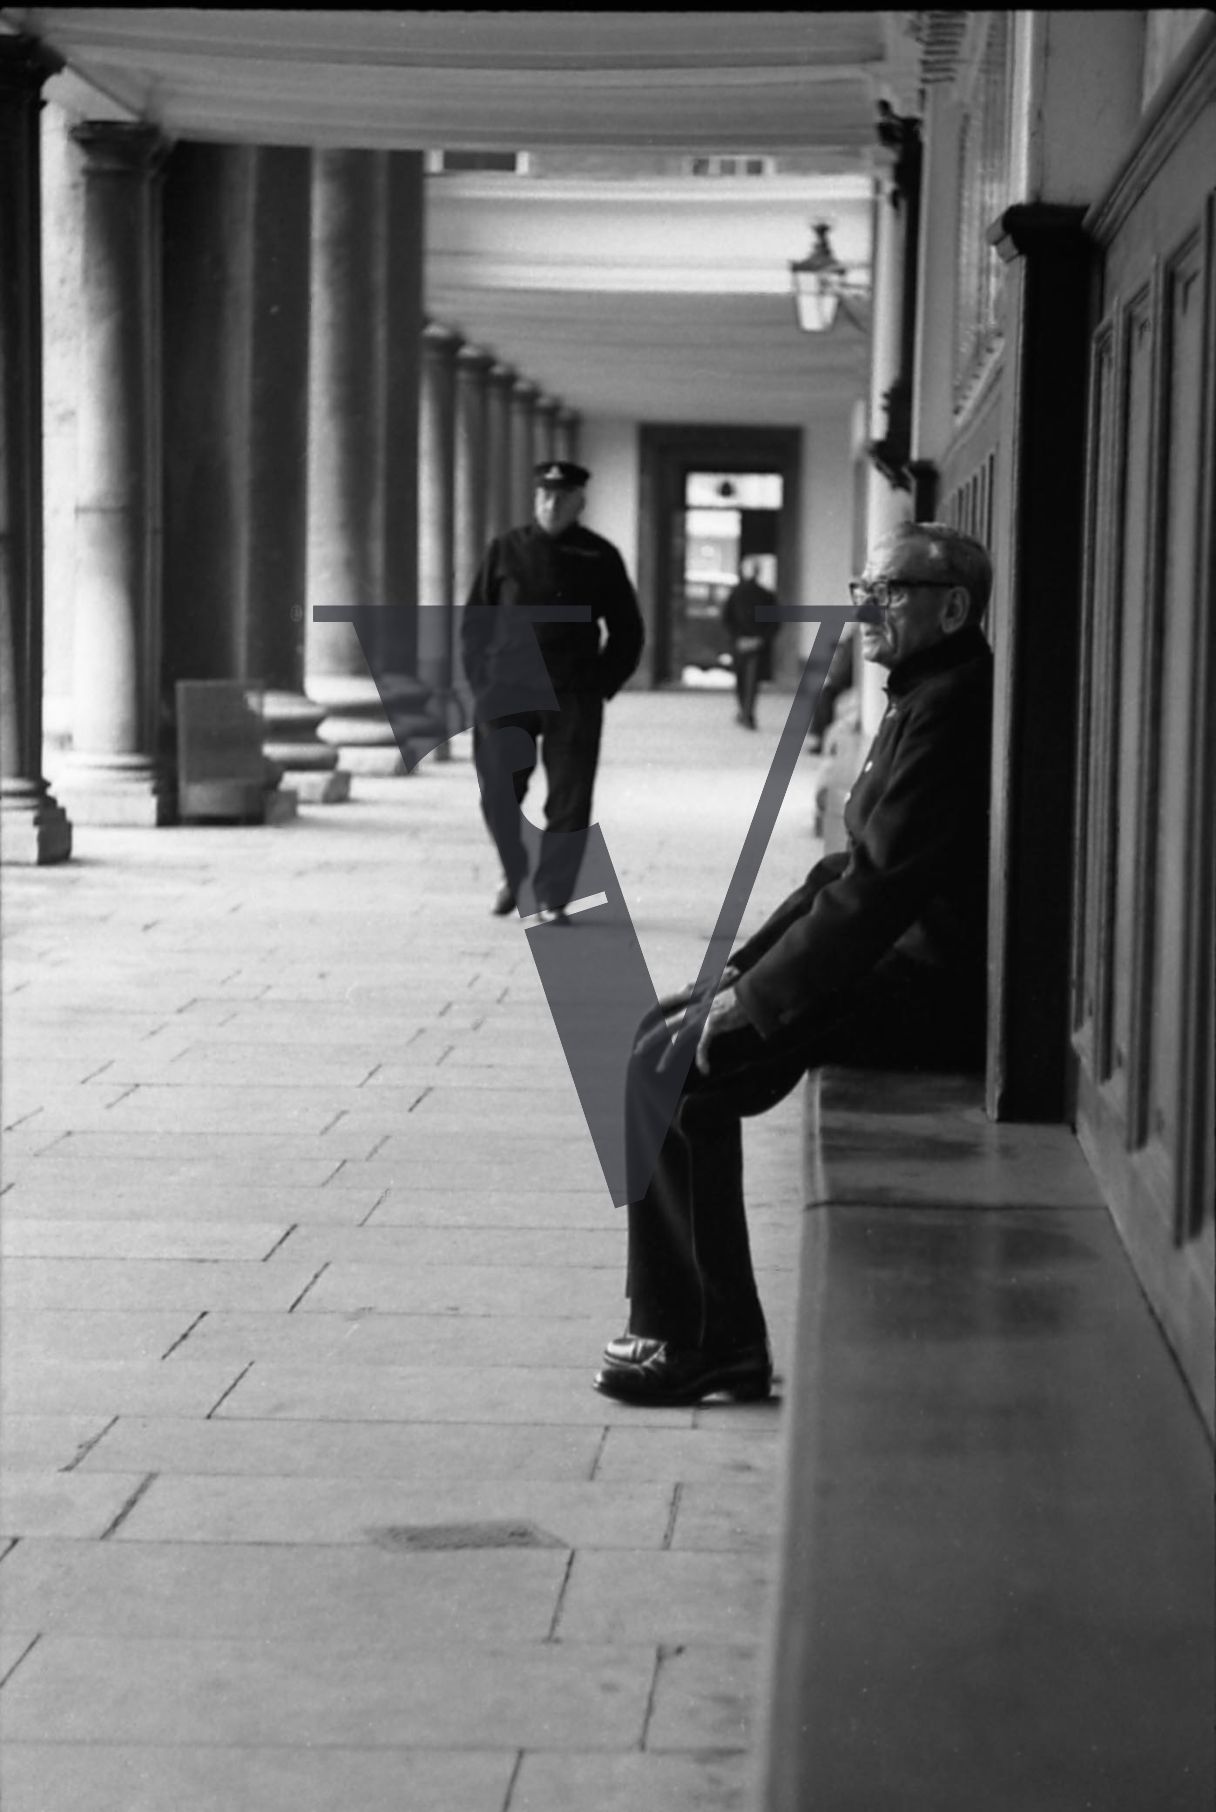 Royal Hospital, Chelsea Pensioners, man in courtyard.